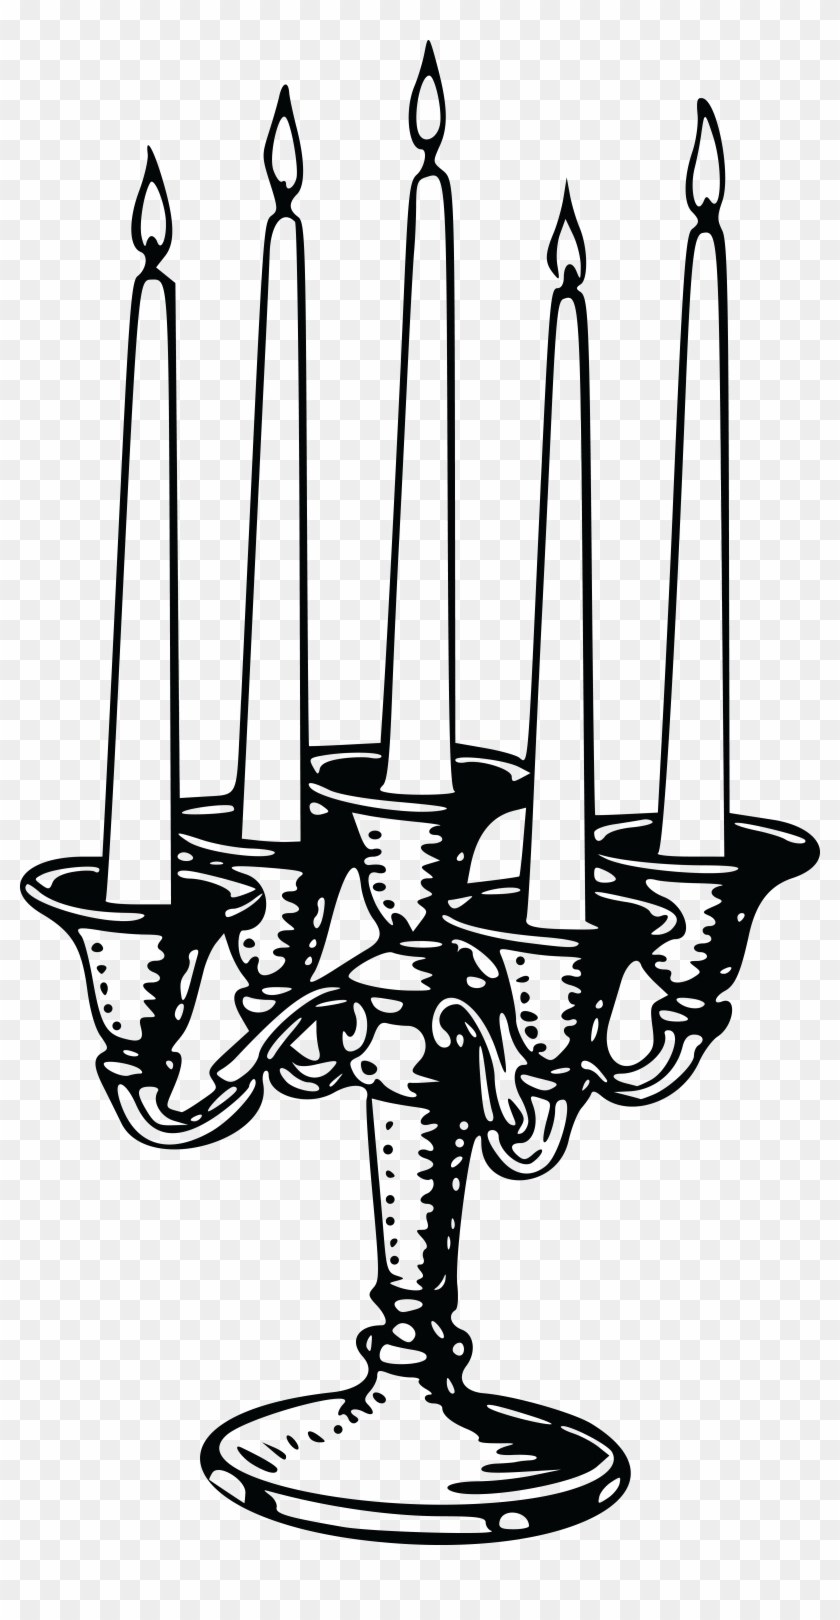 Free Clipart Images - Candlestick #243879